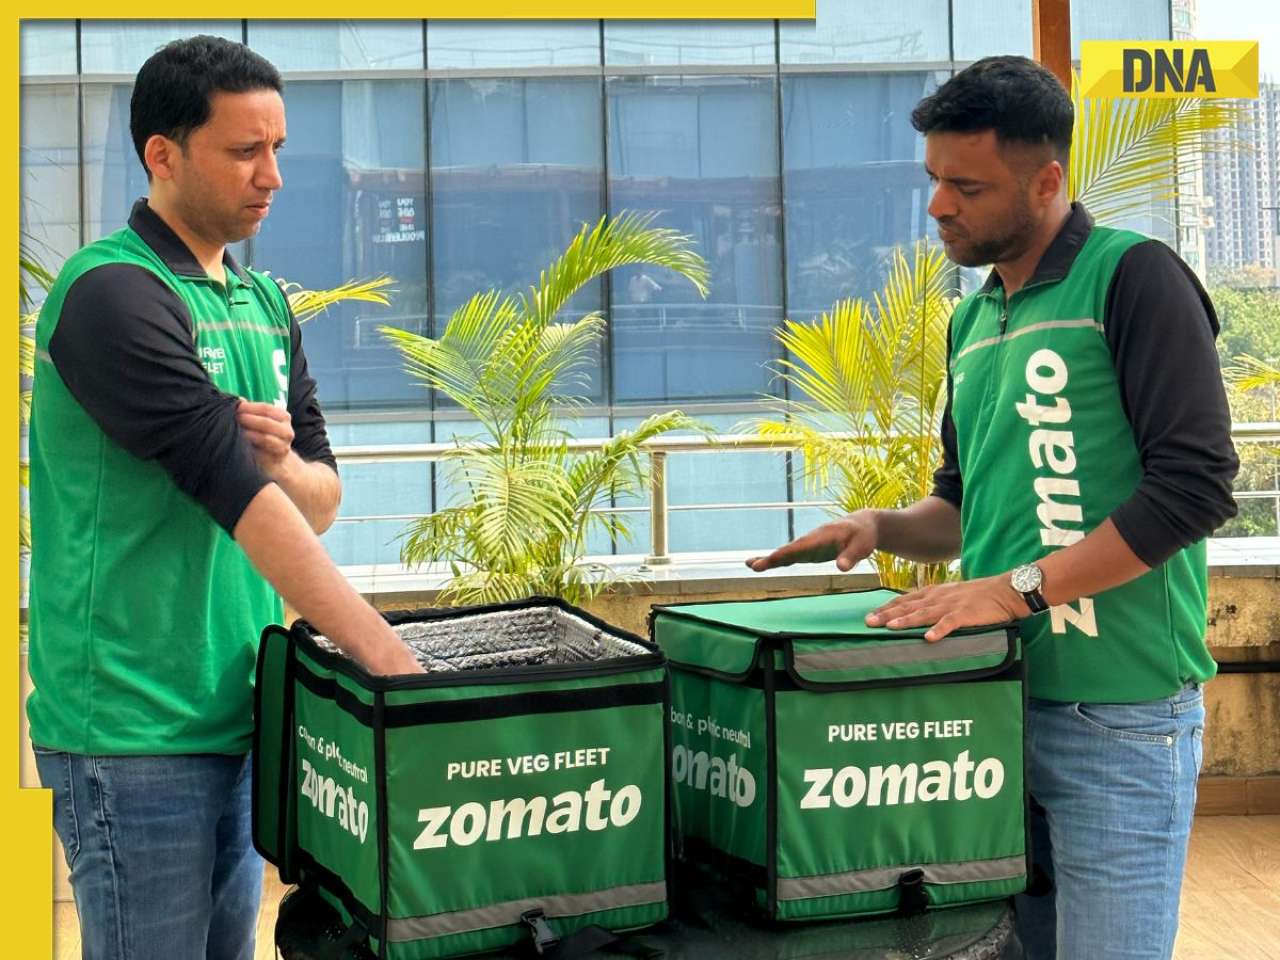 ‘Customers could get into trouble…’: Zomato CEO Deepinder Goyal takes U-turn on new t-shirt